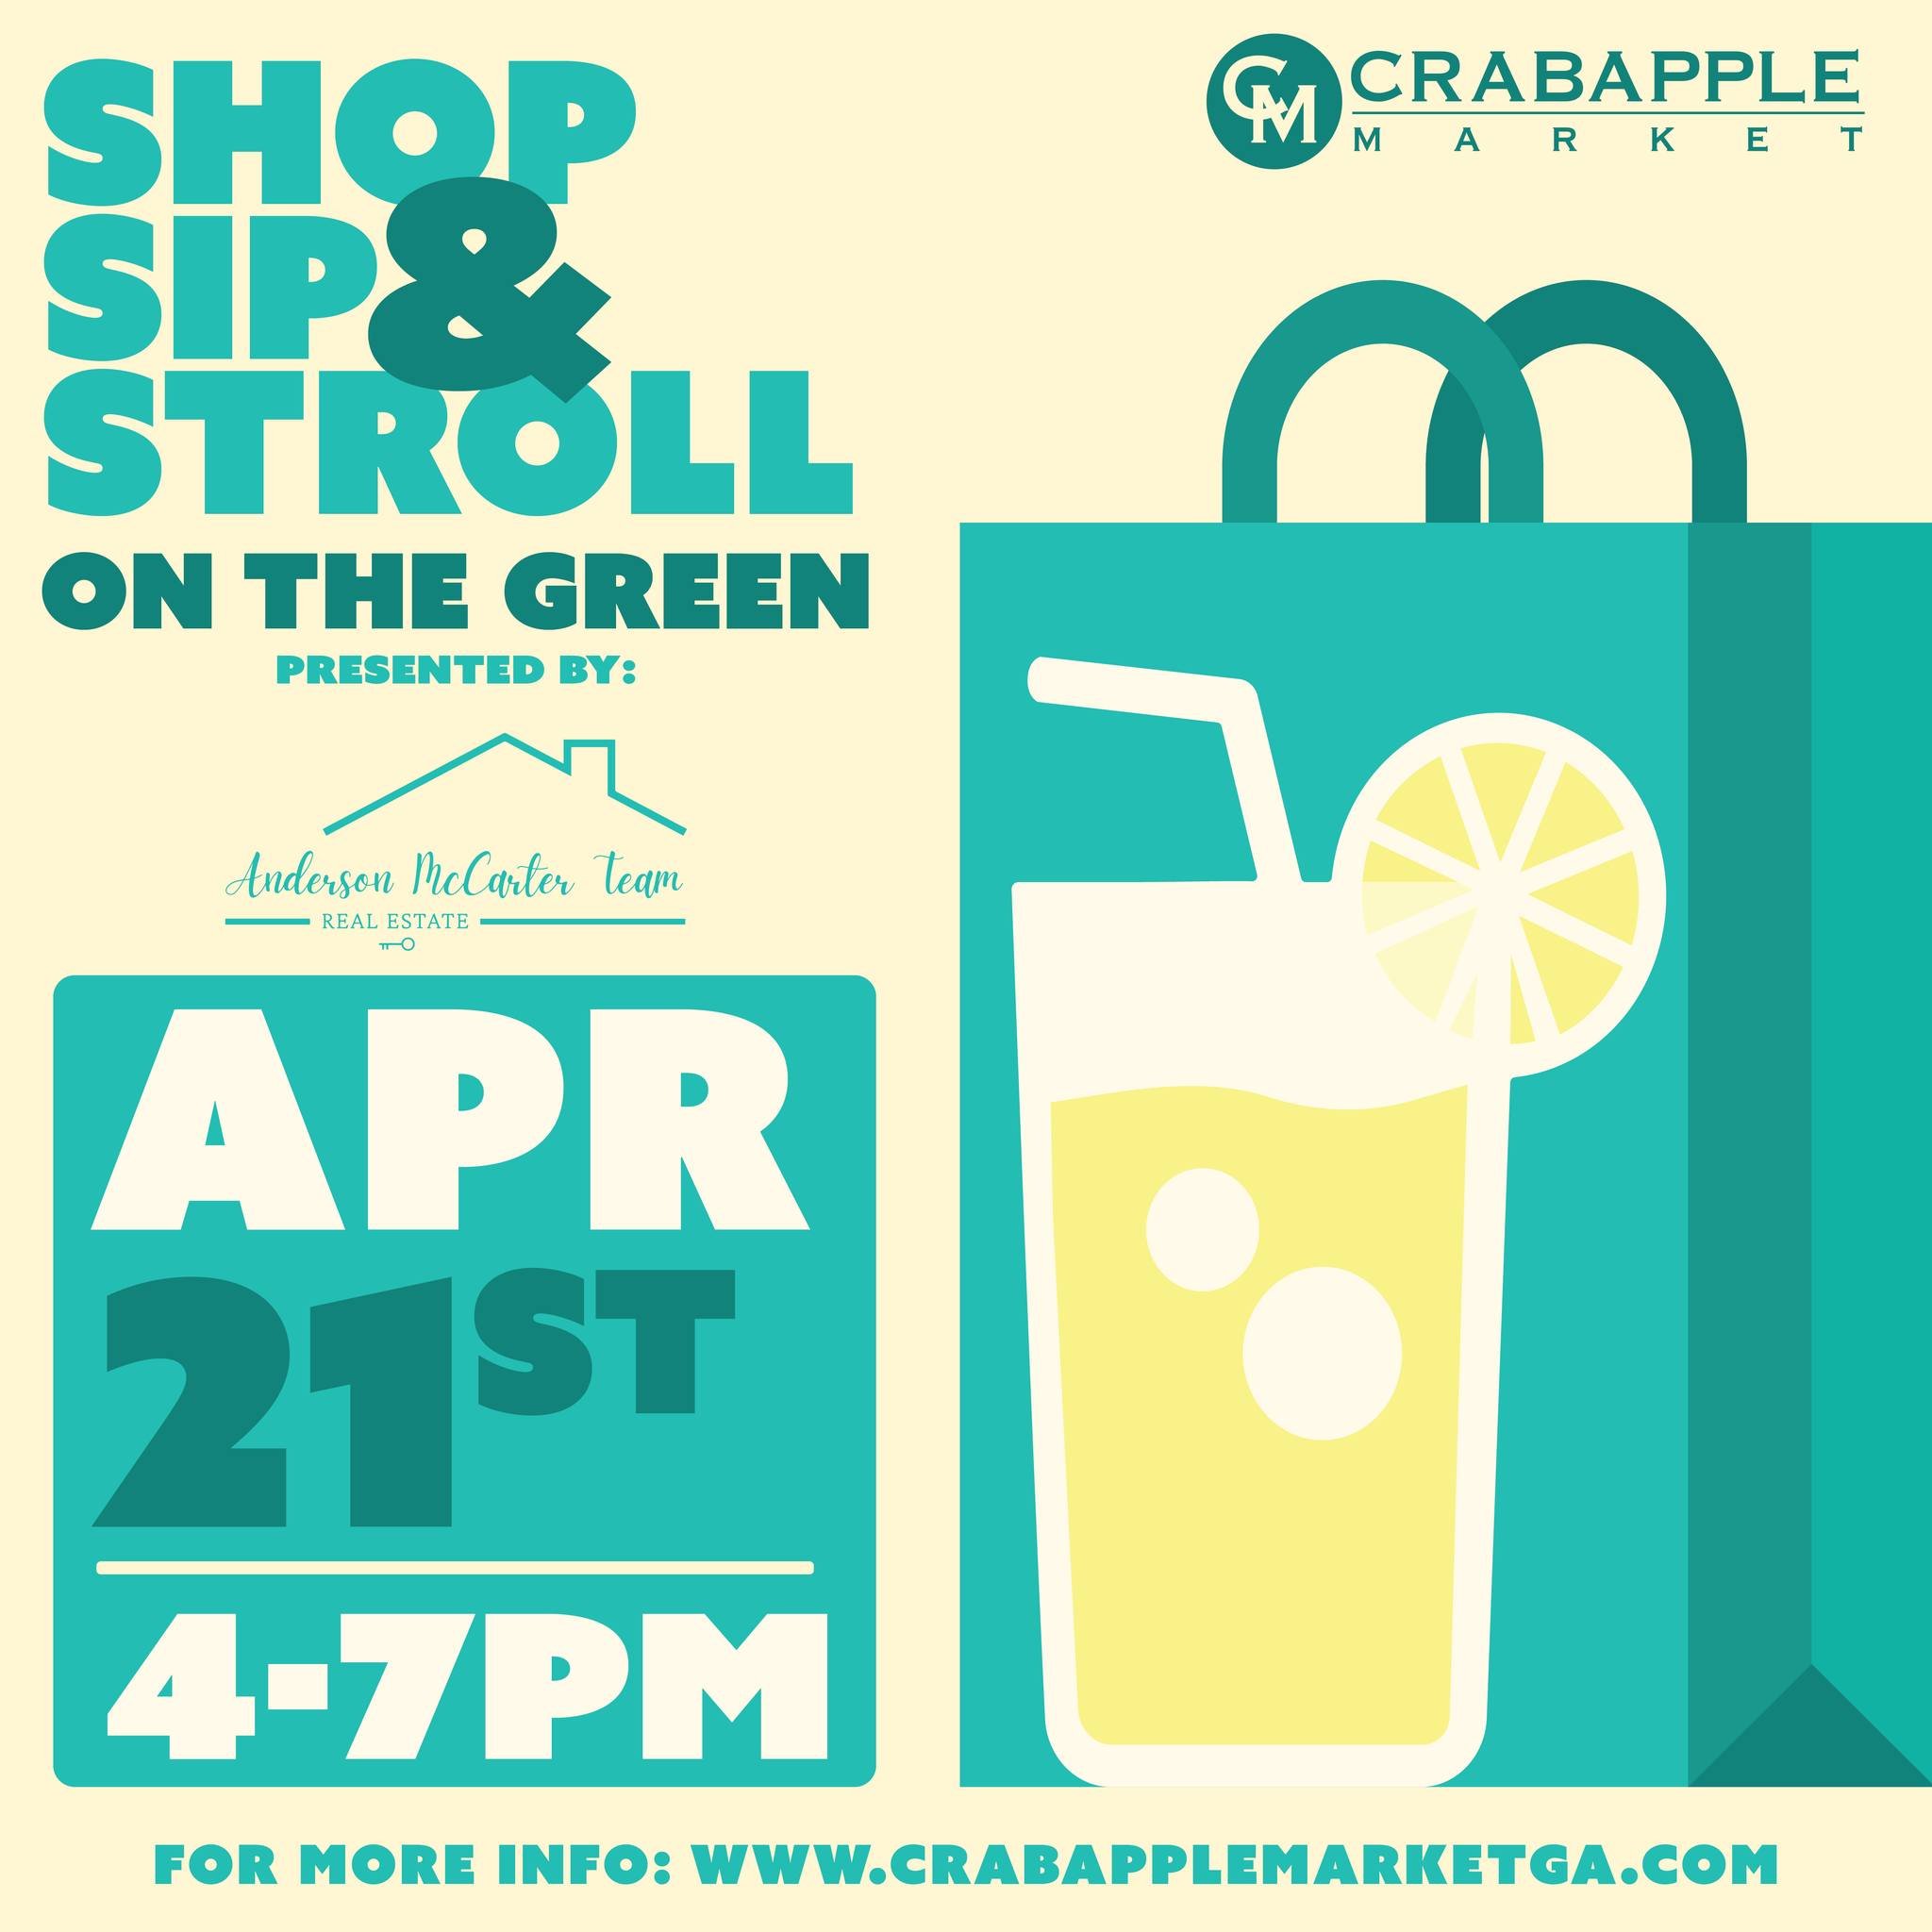 Shop, Sip &amp; Stroll is BACK on a new day, Sunday, April 21st from 4 &ndash; 7pm on The Green! It&rsquo;s better than ever with 35+ talented artisans offering an eclectic mix of handcrafted wares. You&rsquo;ll find home decor, plants, flowers, jewe